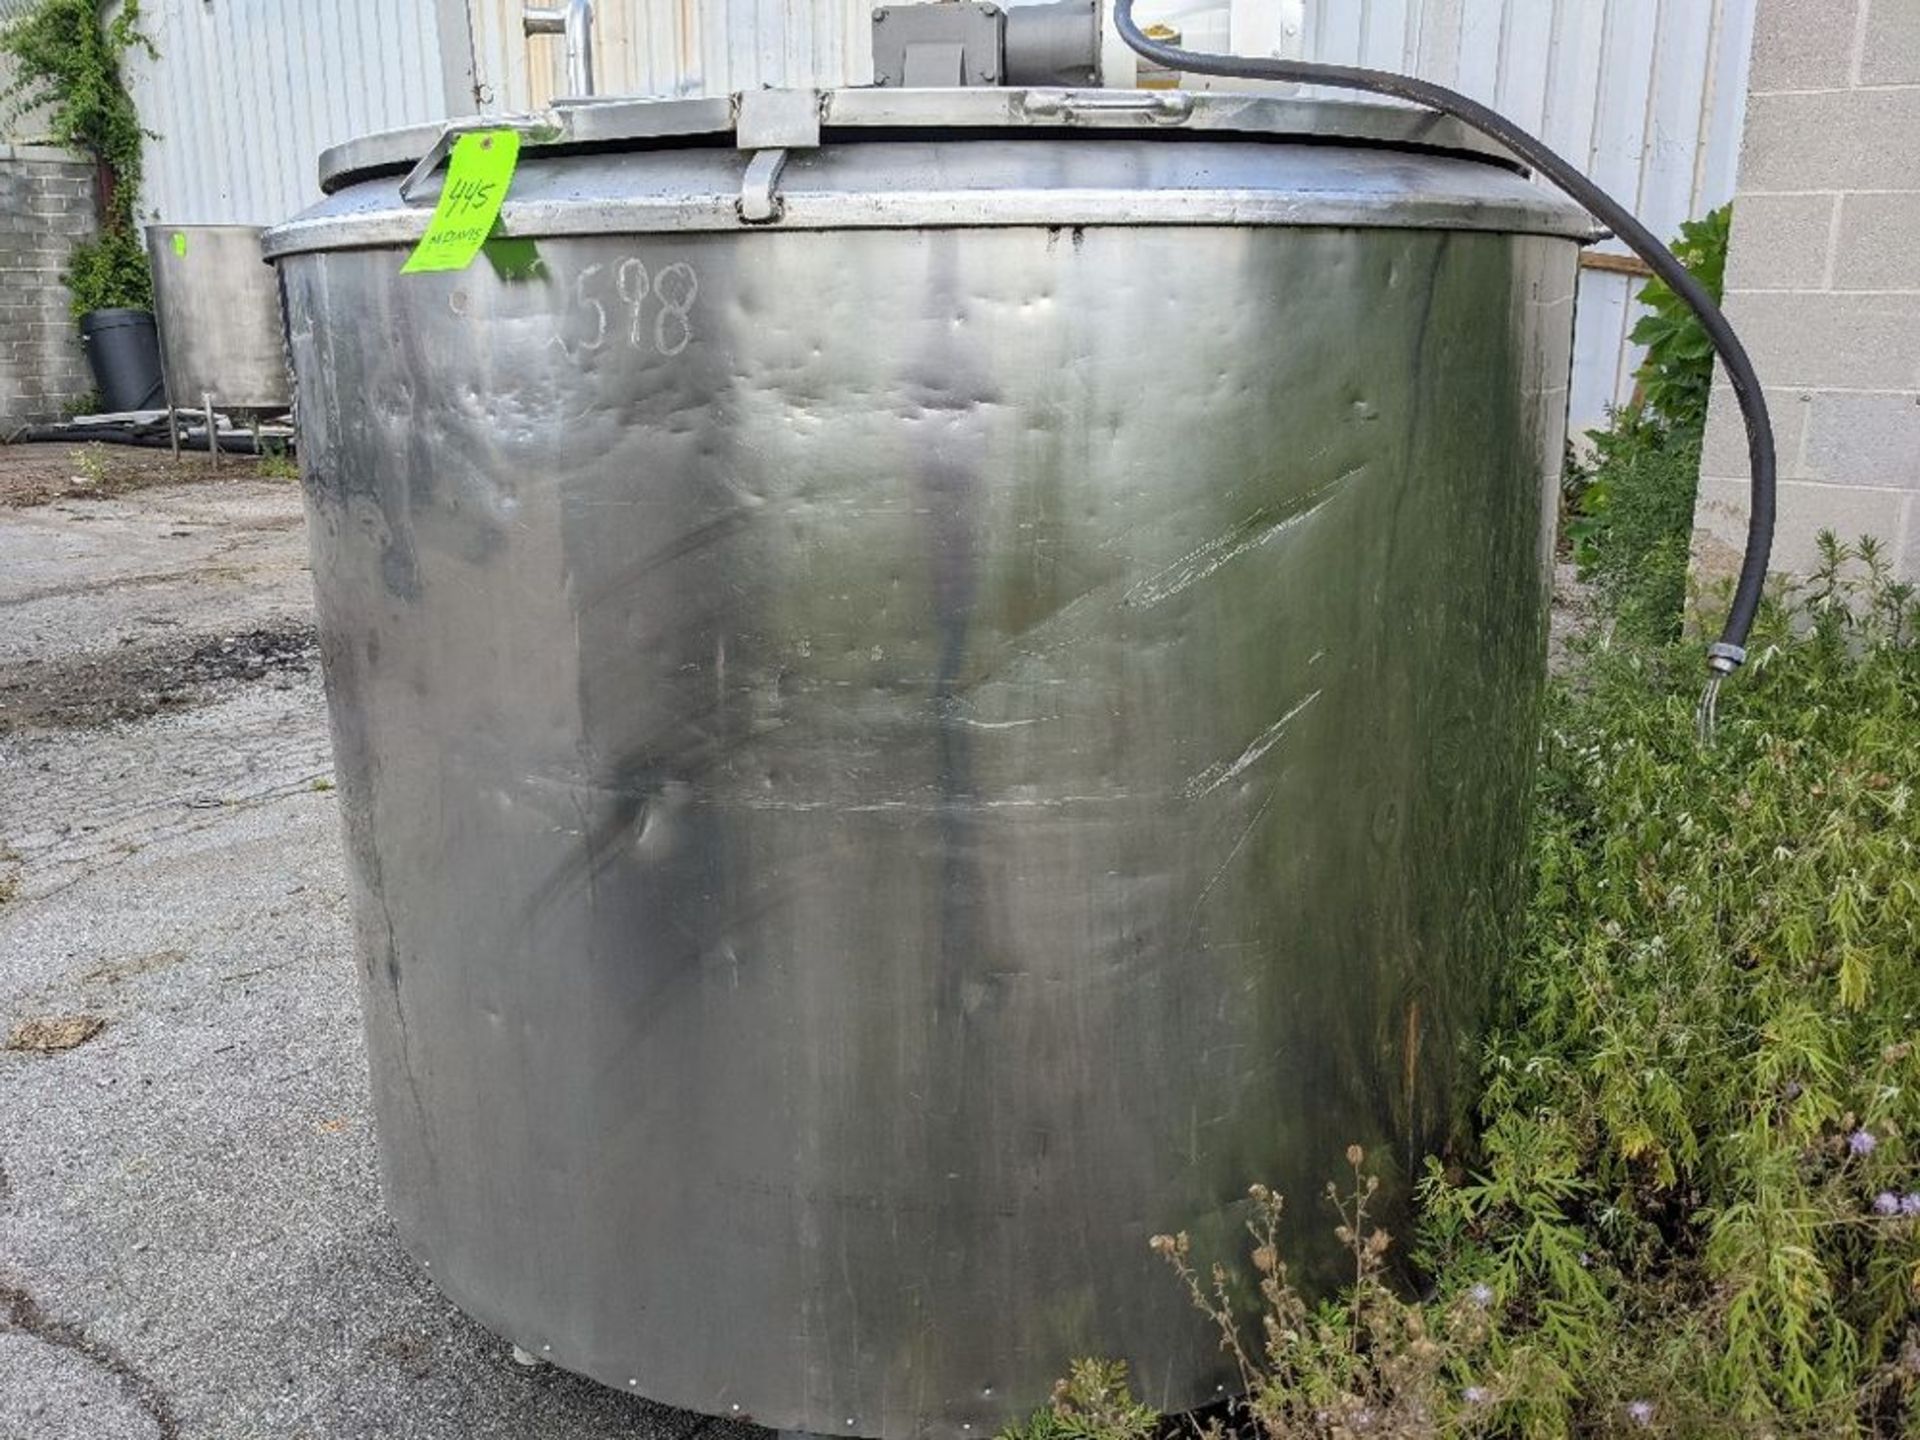 Qty (1) The Creamery Package Vertical Jacketed Stainless Steel Tank - 48' straight side x 60 inch